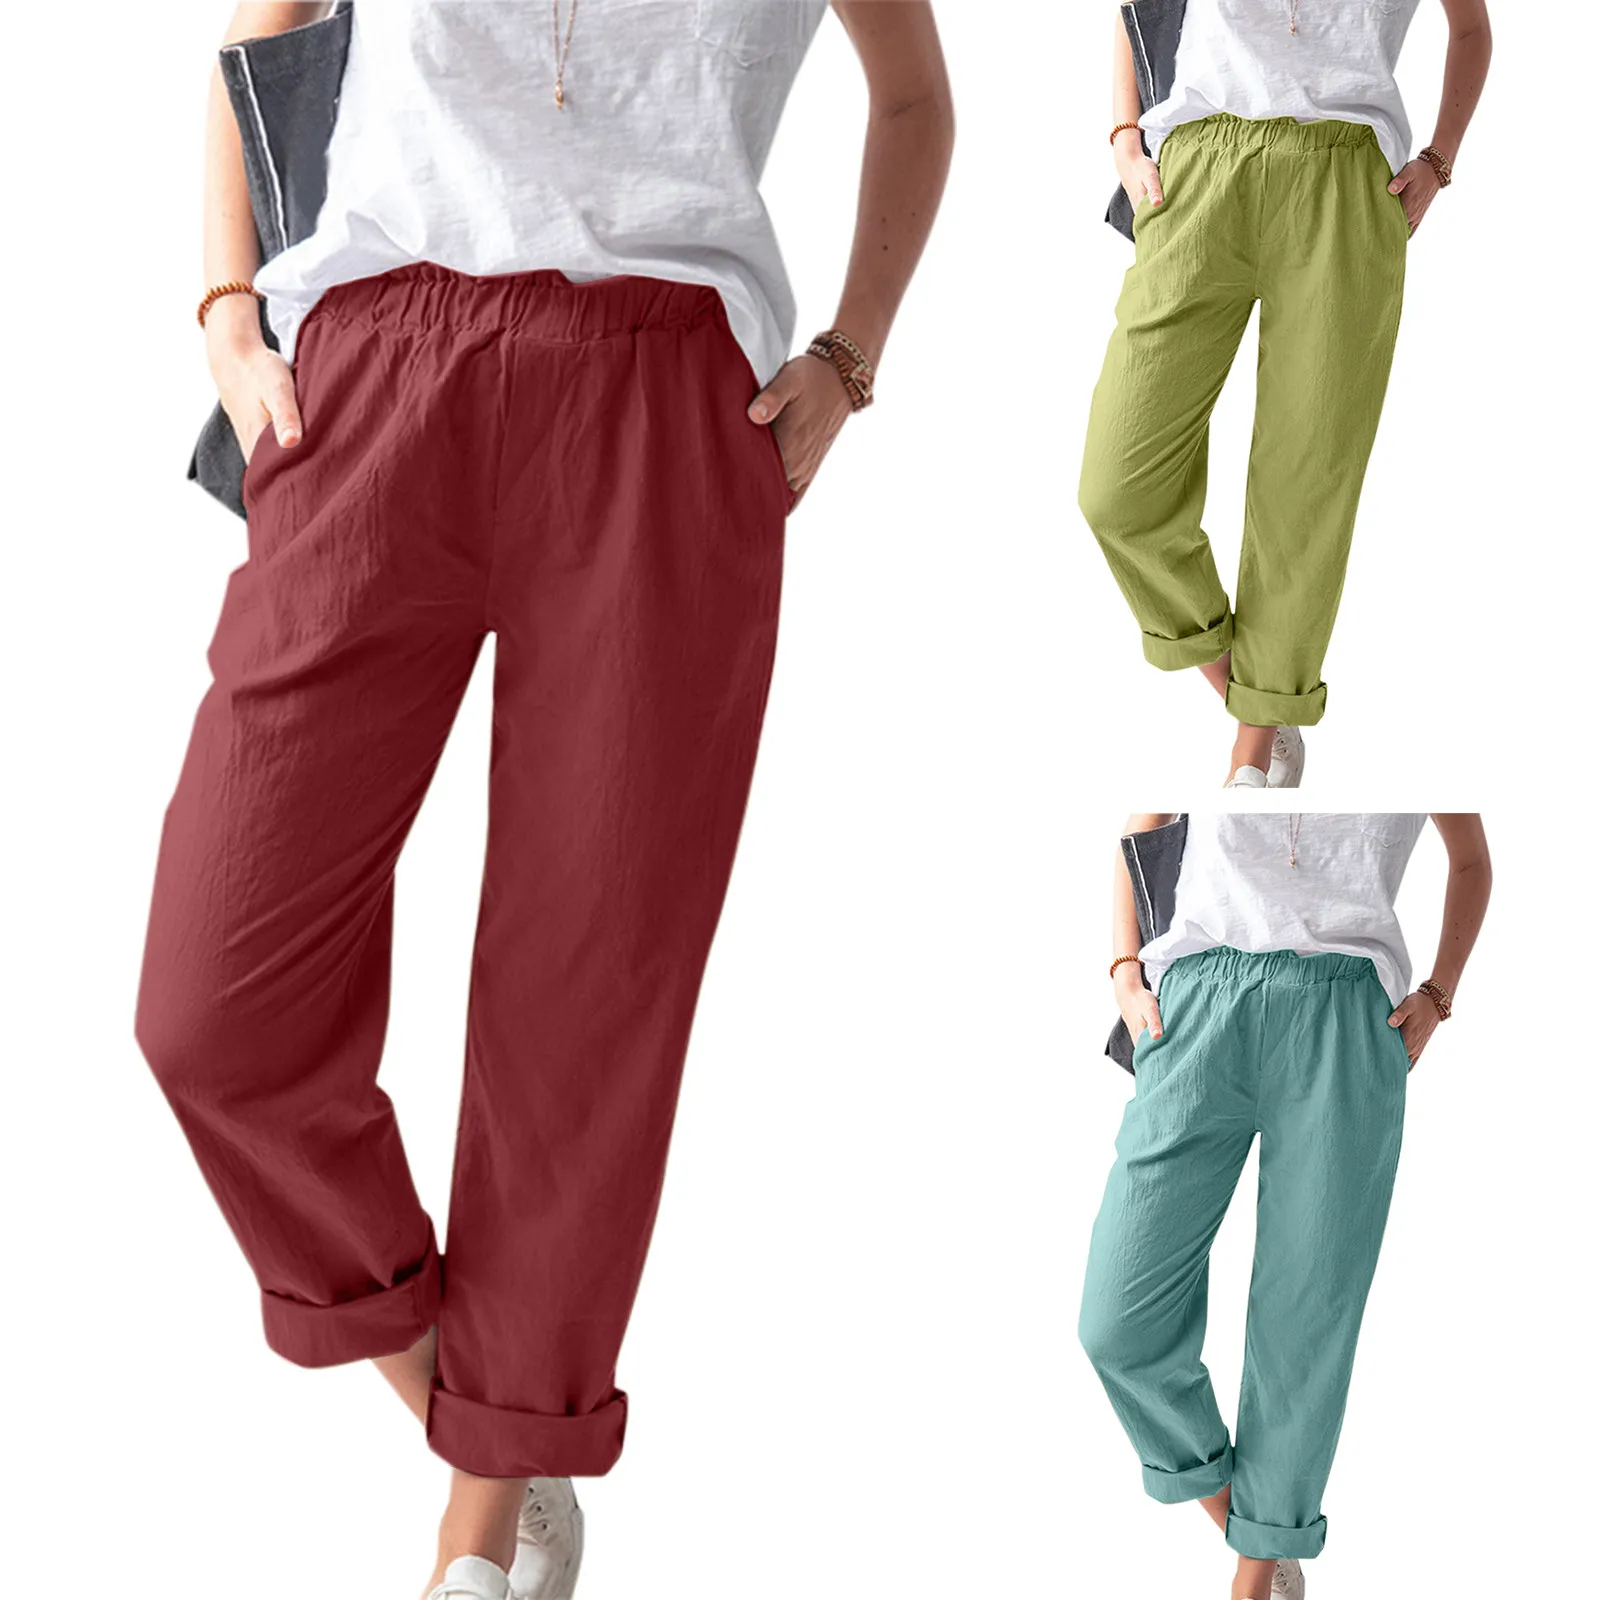 Womens Clothing Trousers Pianurastudio Cotton Pants in Red Slacks and Chinos Capri and cropped trousers 